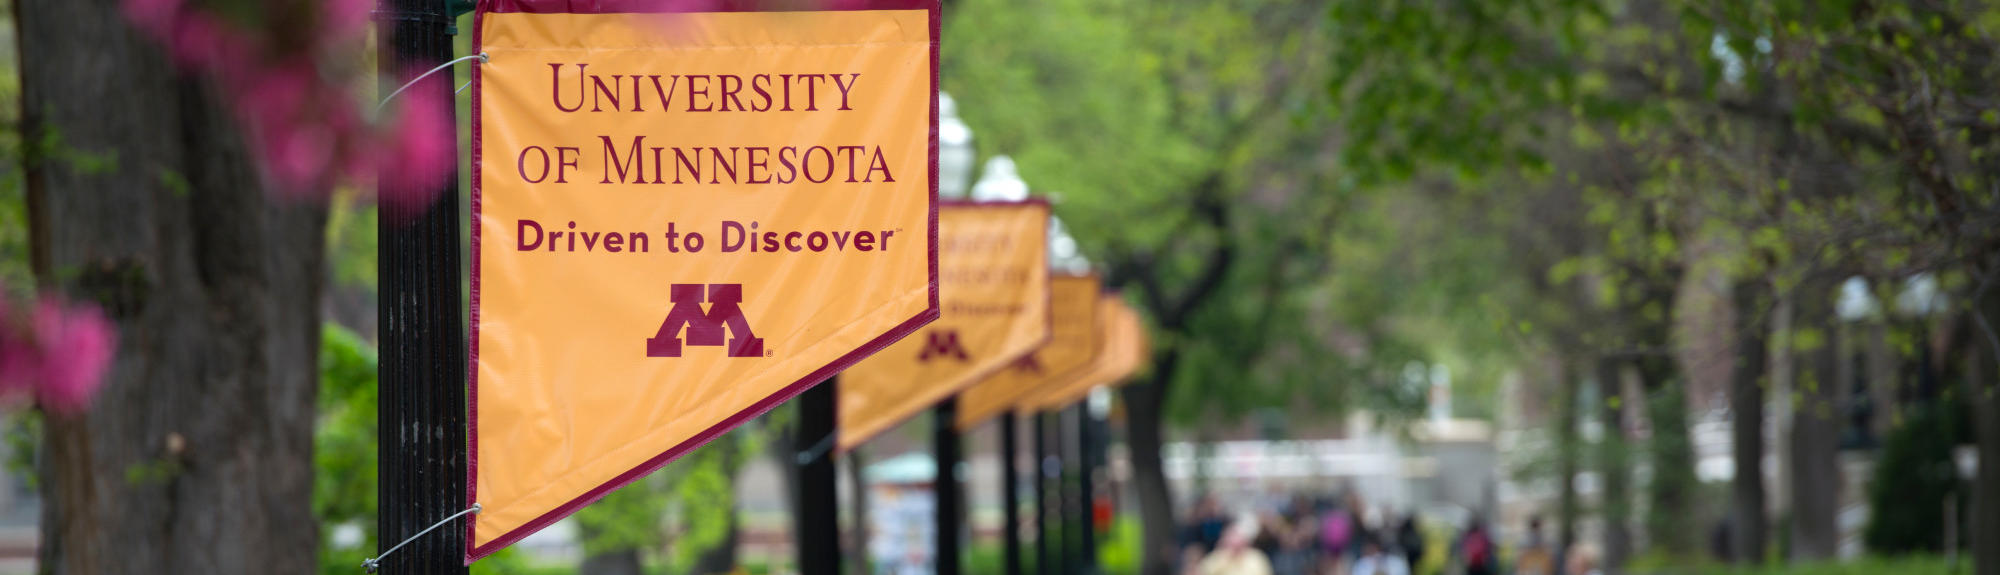 "University of Minnesota Driven to Discover" banners along the tree-lined sidewalk